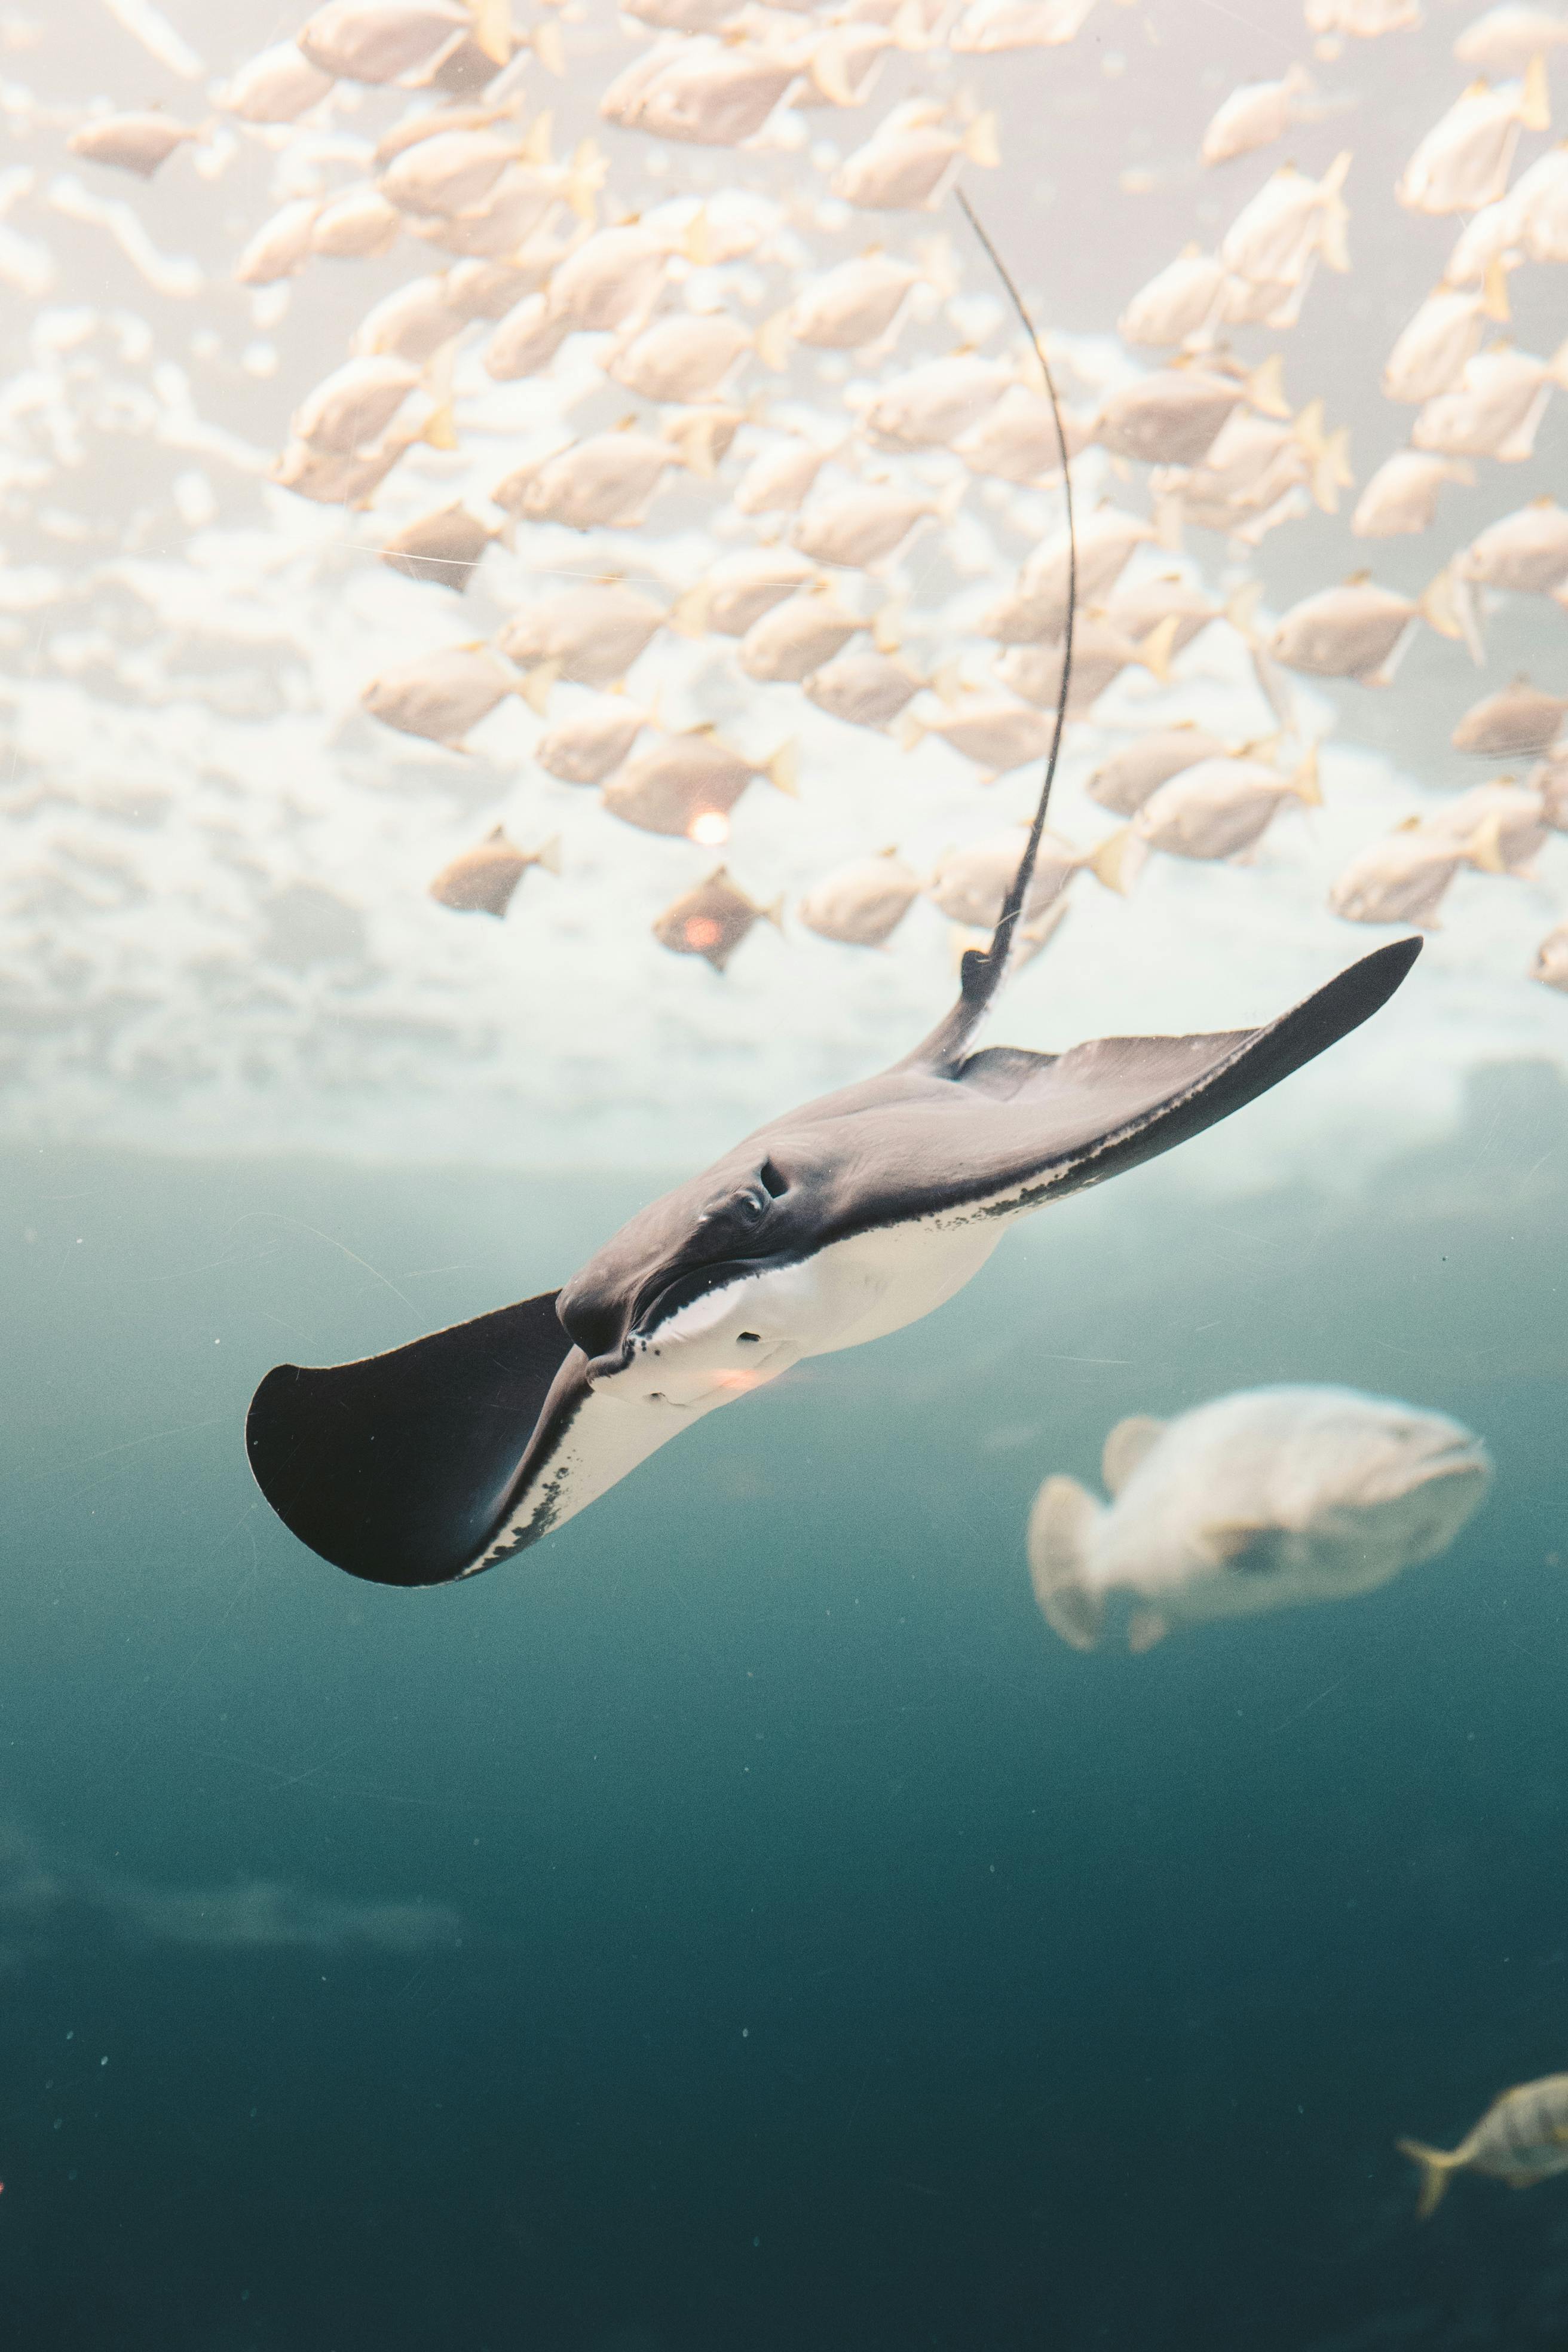 Stingray Images  Free Photos PNG Stickers Wallpapers  Backgrounds   rawpixel